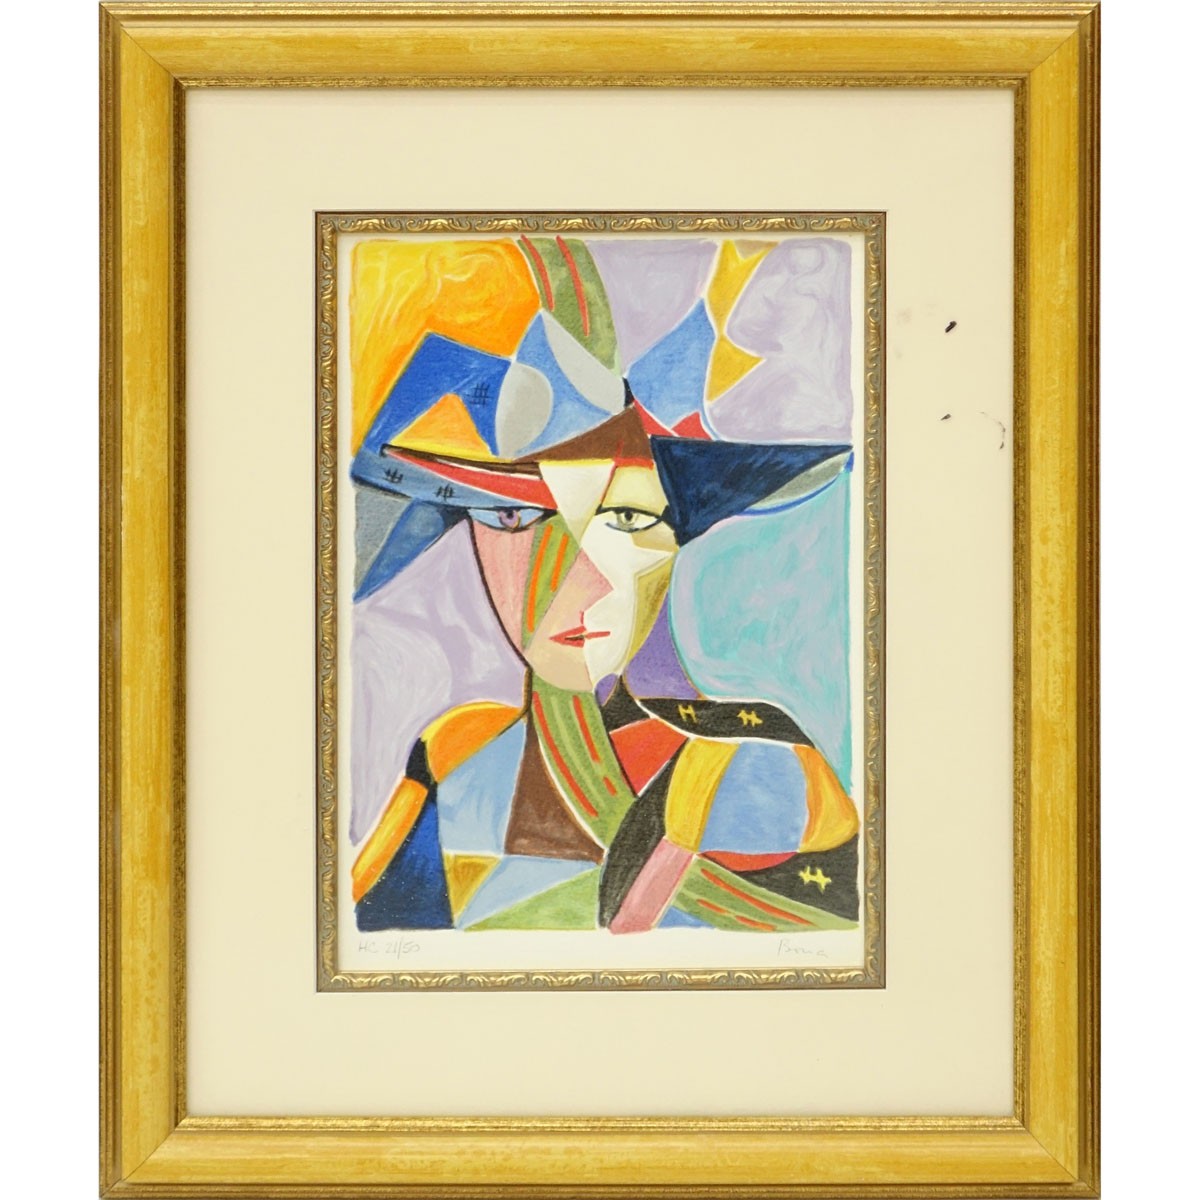 Bona (Bona de Mandiargues), Italian/French (1926–2000) Color Serigraph, Portrait of a Woman, Signed and Numbered HC 21/50. Good condition.